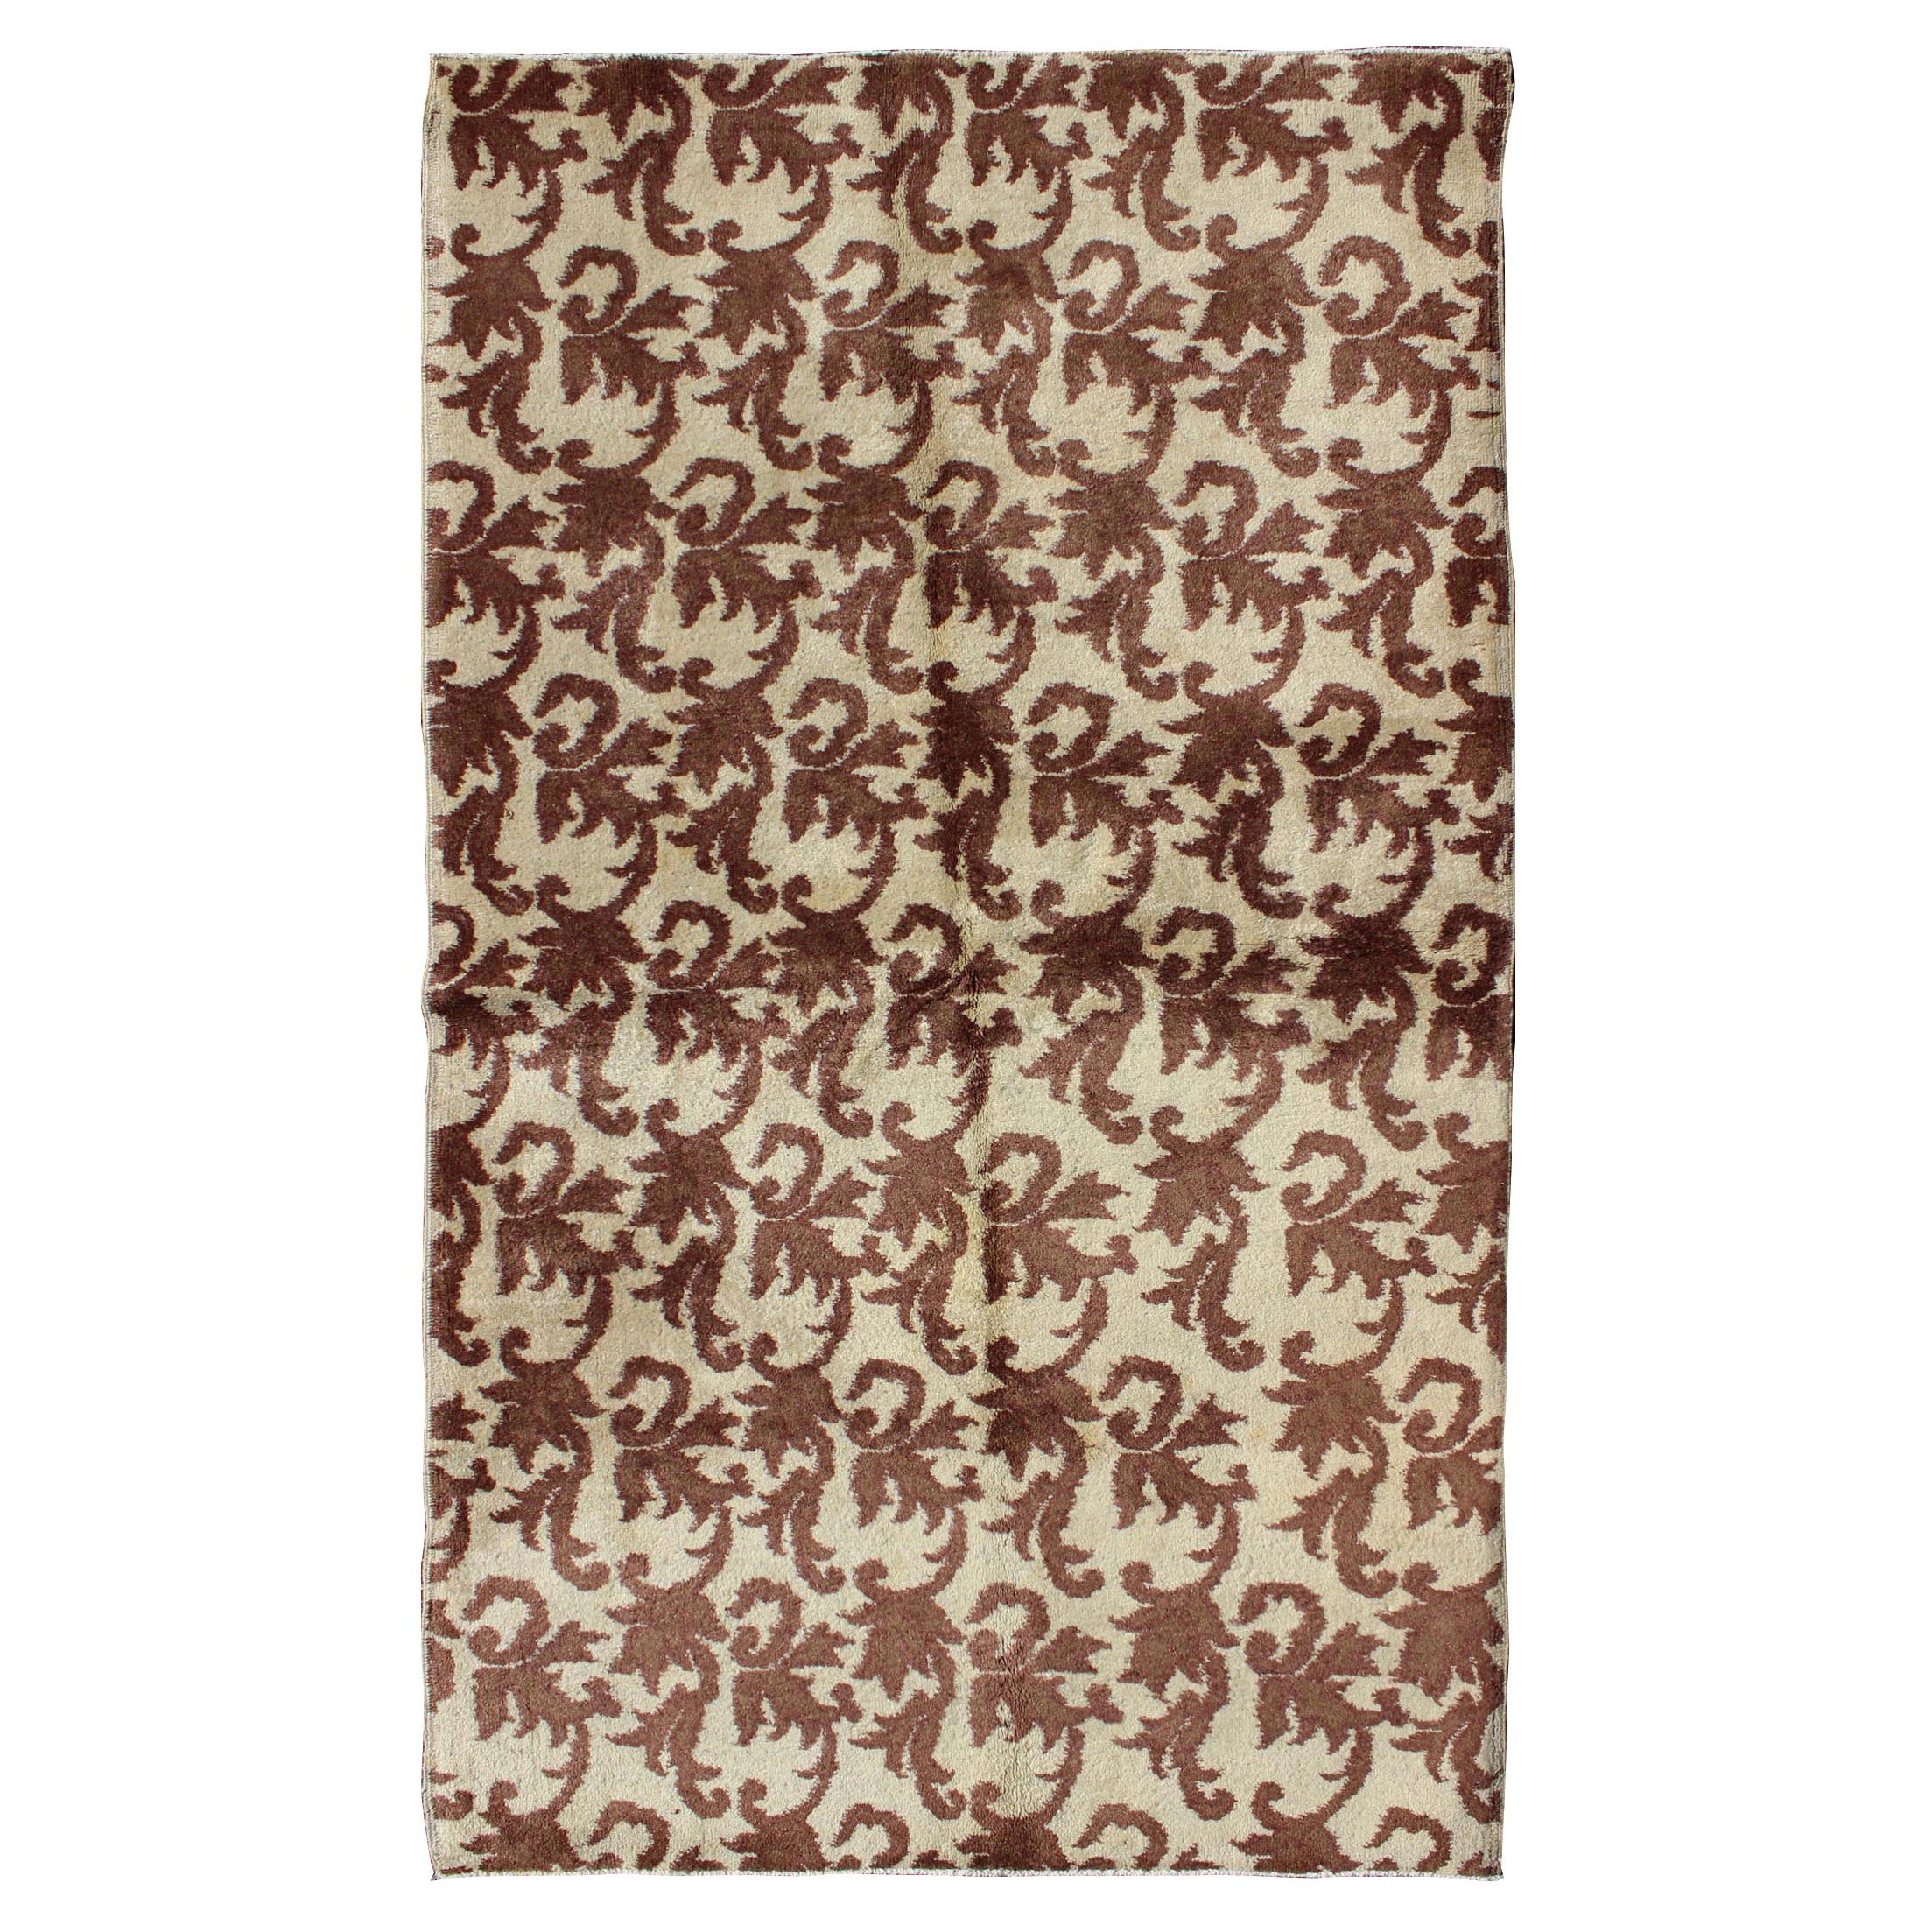 Art Deco Design Rug with a Modern Design in Chocolate Brown and Gray Taupe For Sale